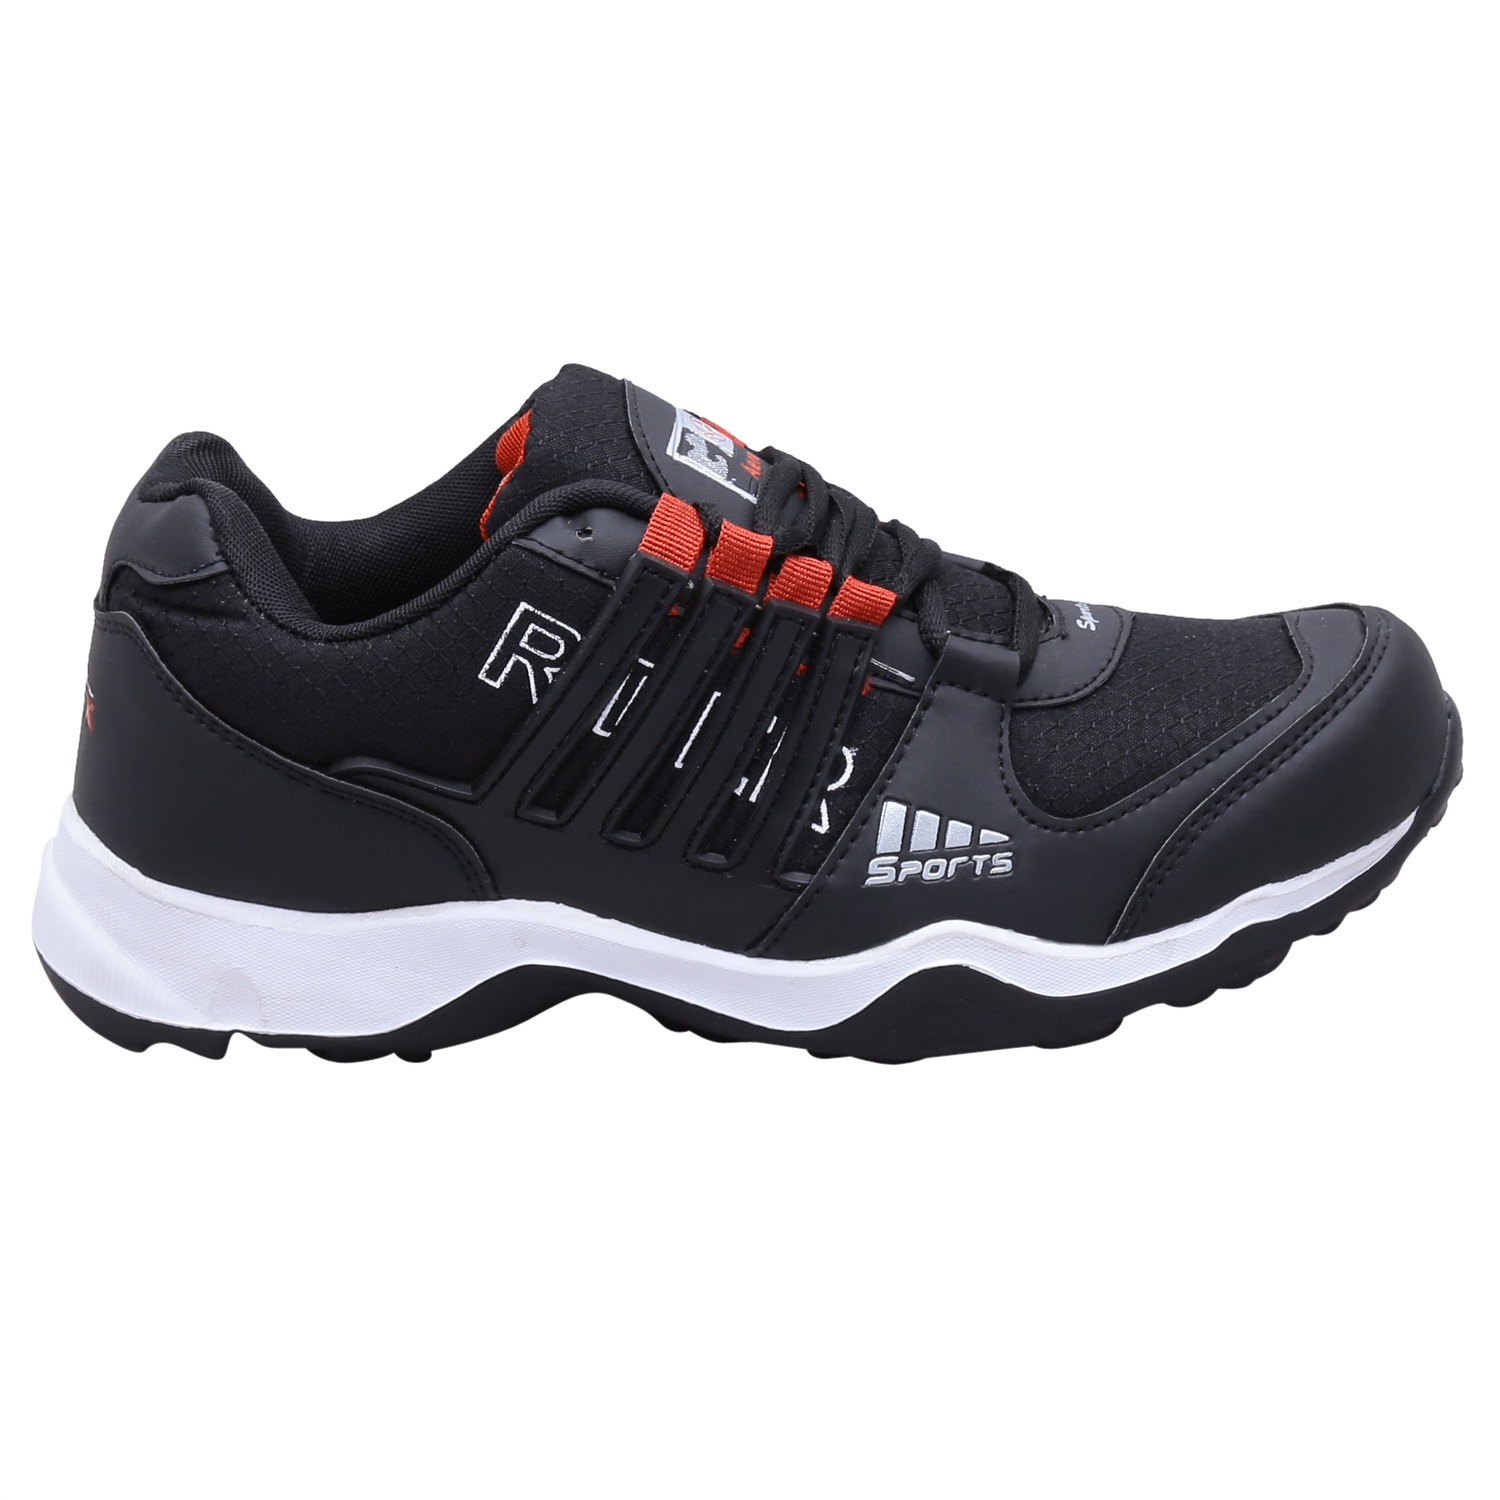 Aero Fax Sport Running Shoes AF-8002BLKRED